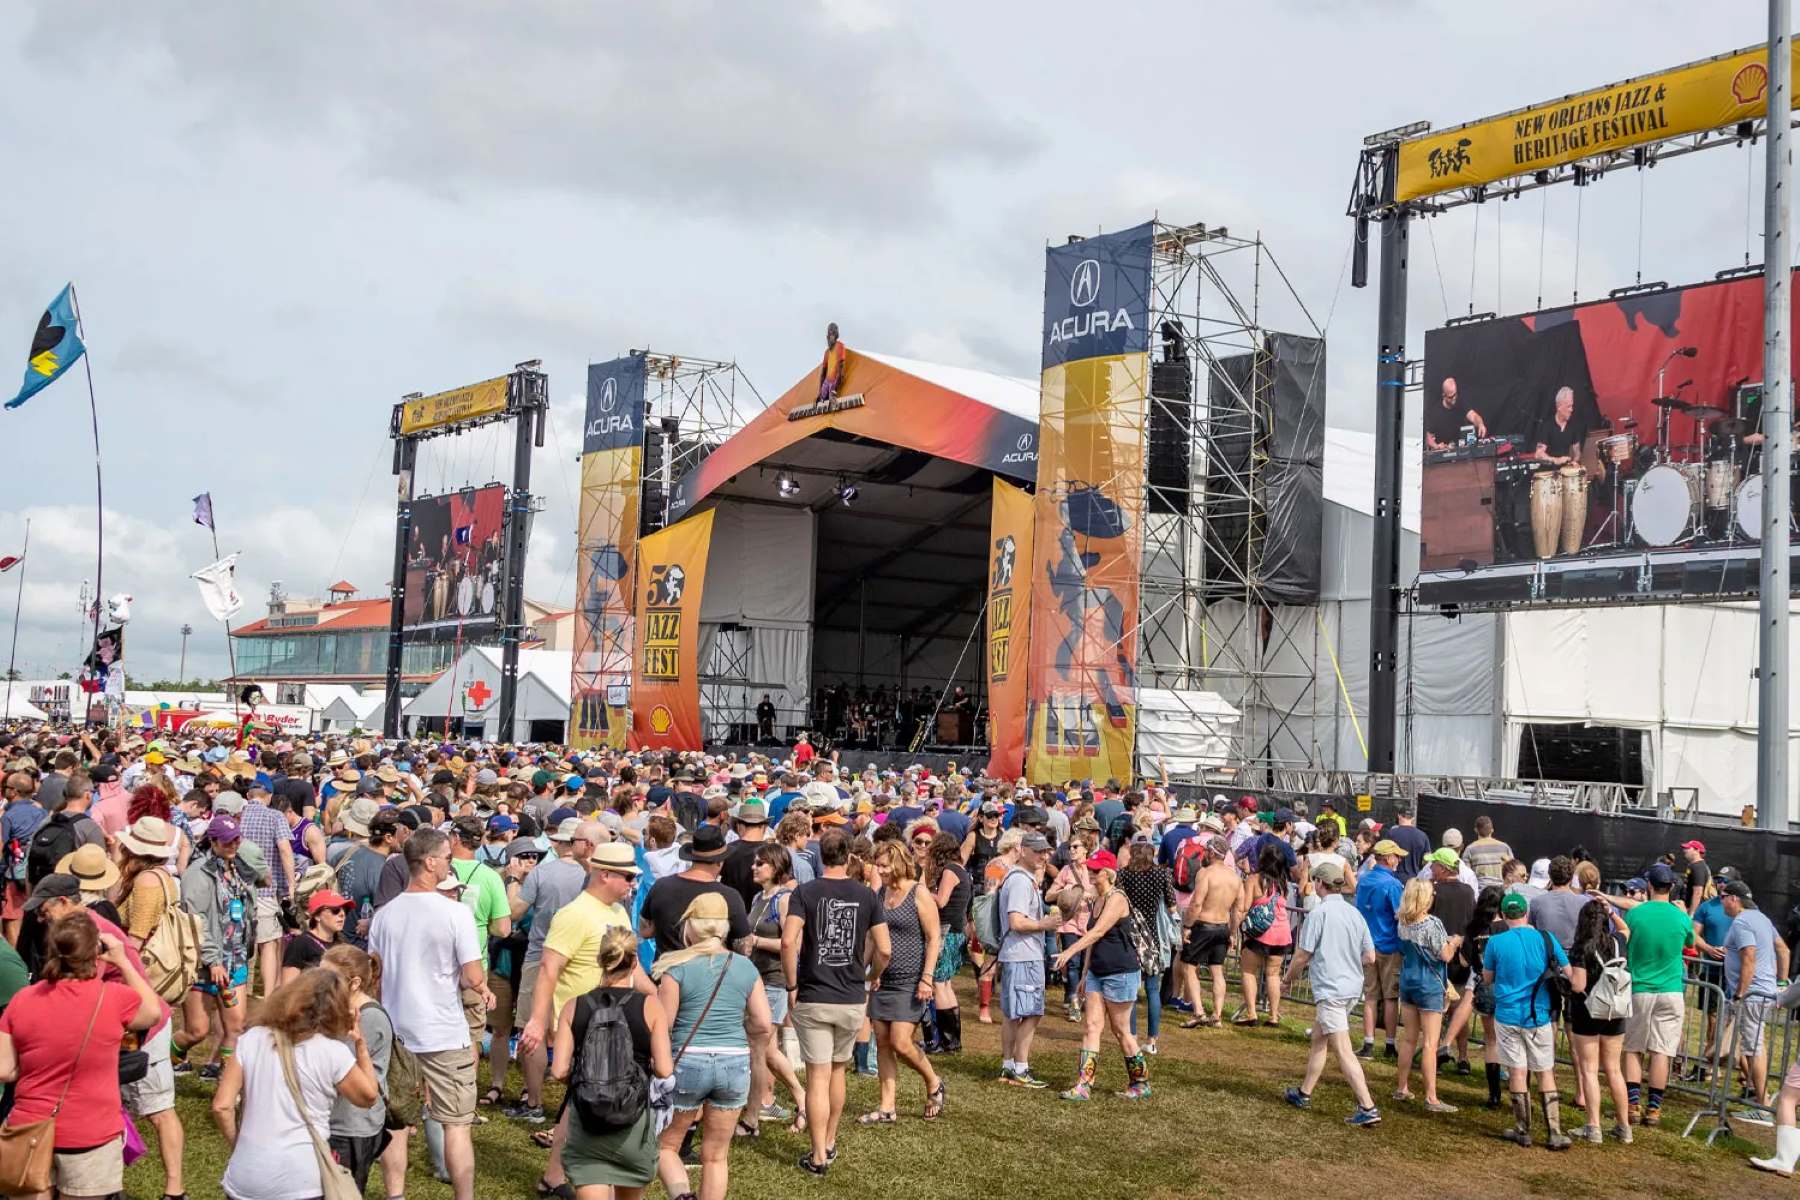 Where To Purchase Jazz Fest Tickets